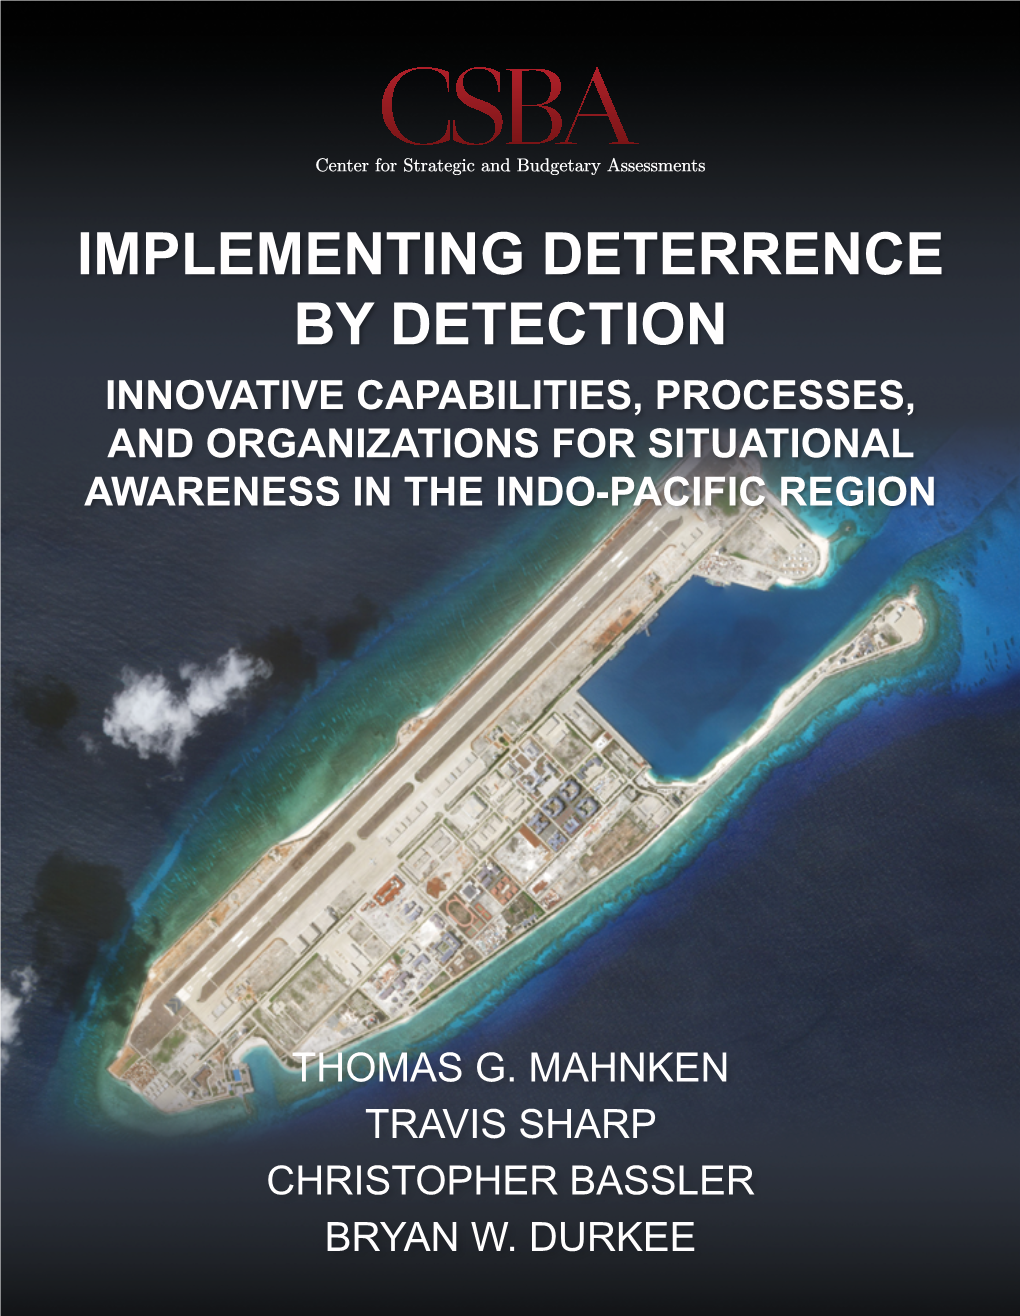 Implementing Deterrence by Detection Innovative Capabilities, Processes, and Organizations for Situational Awareness in the Indo-Pacific Region